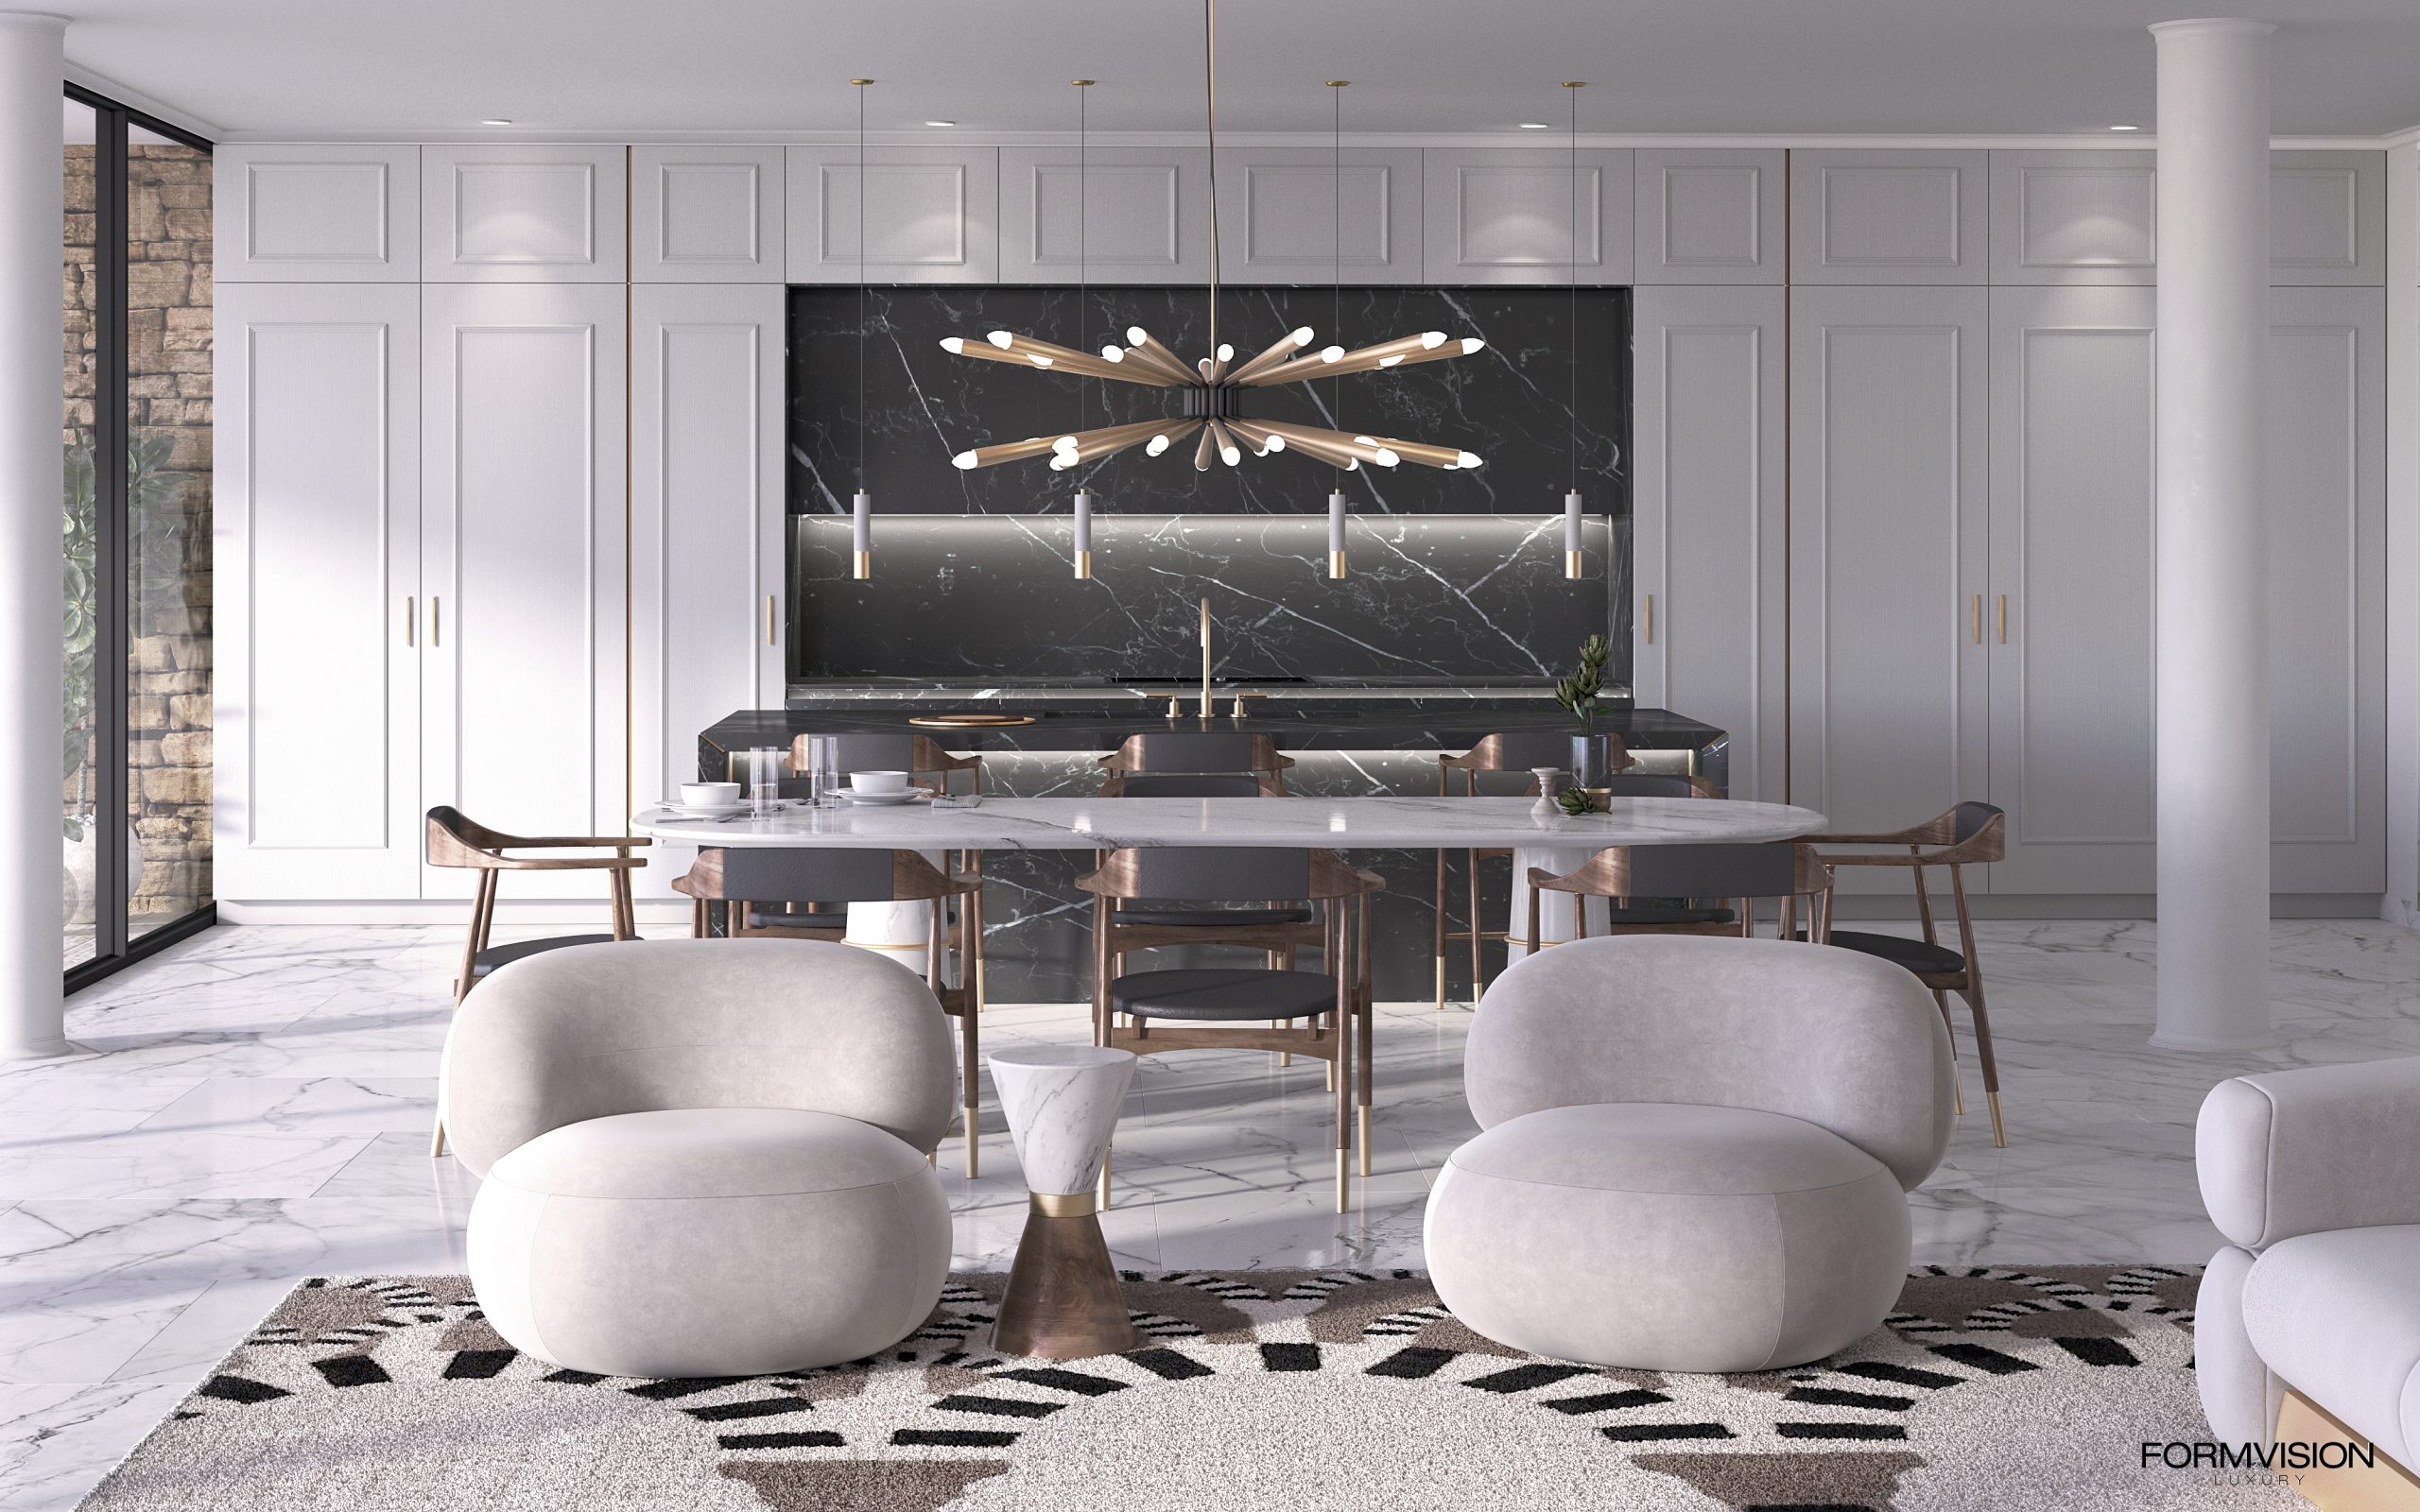 Discover How PullCast Adorn Elegantly The MeetSales's Moscow Flat